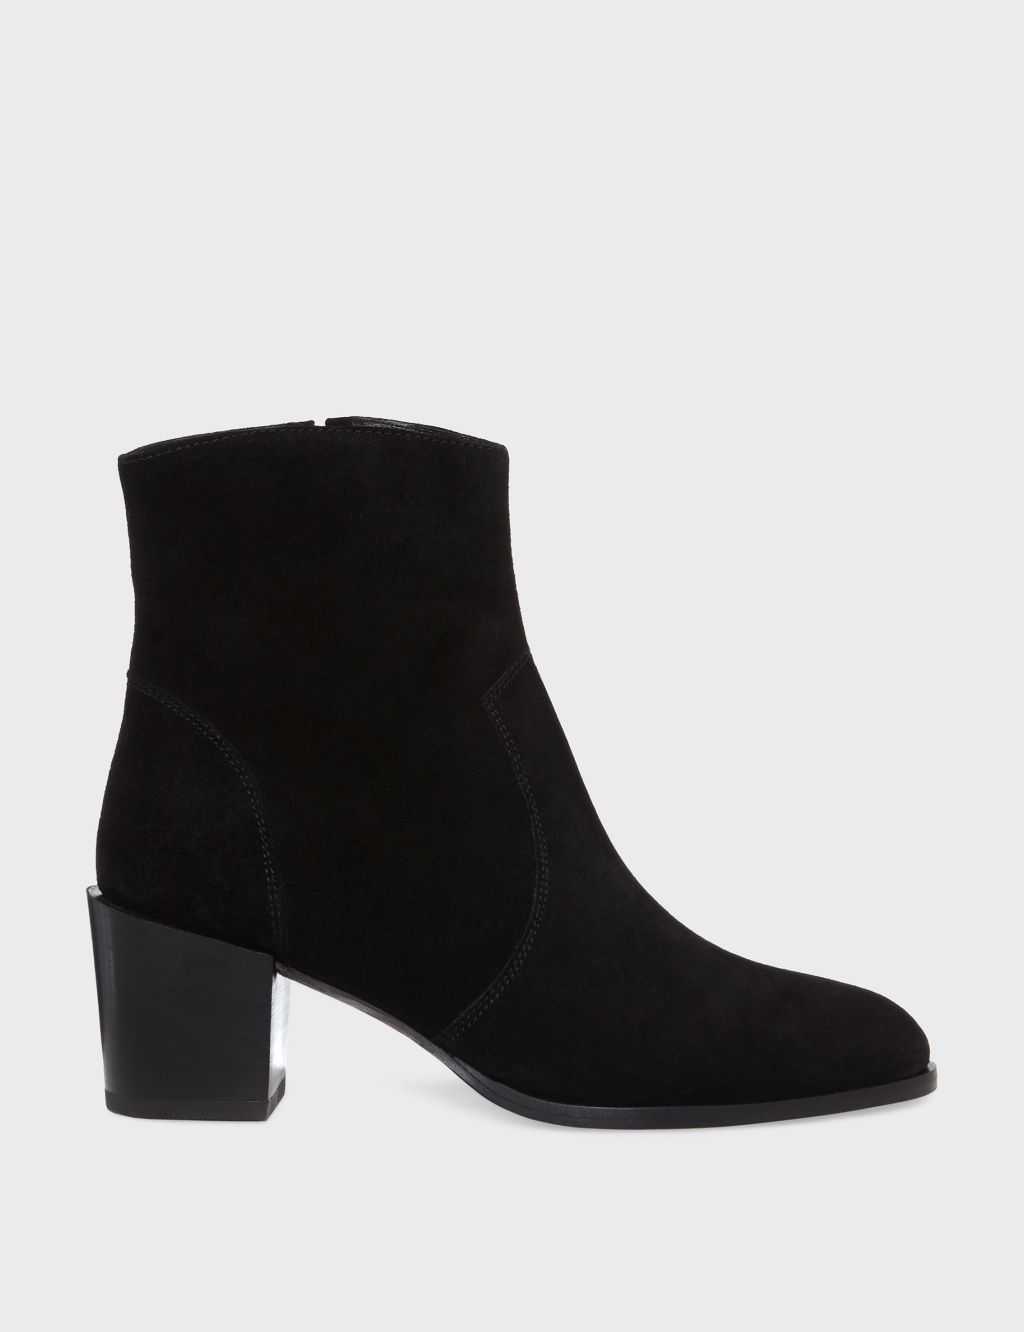 Suede Block Heel Round Toe Ankle Boots image 2